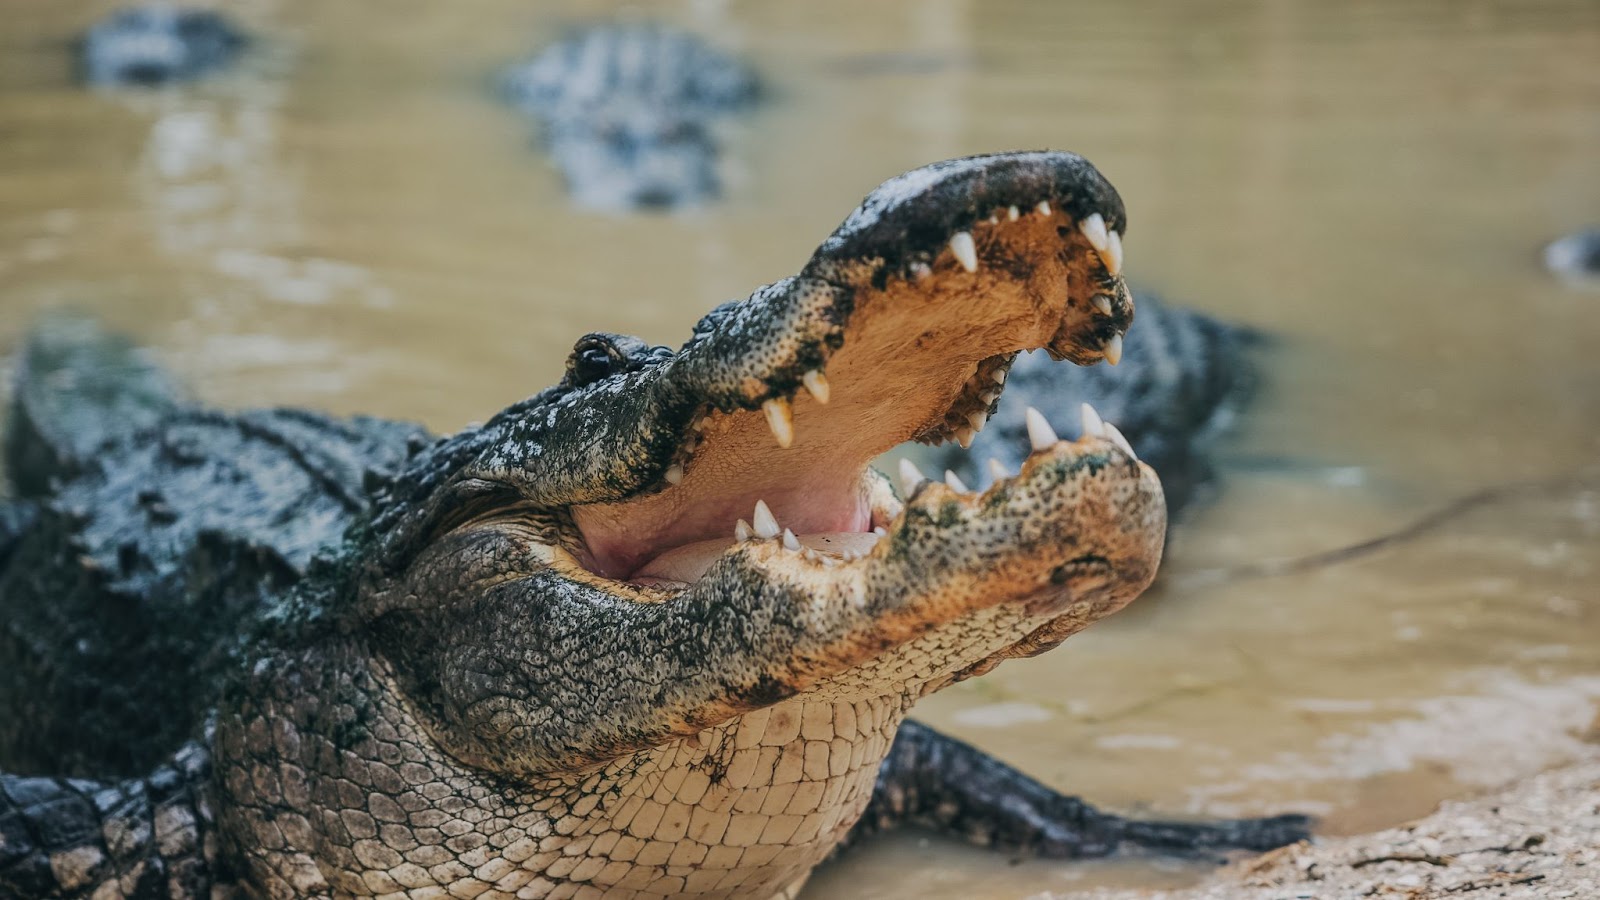 An adult gator gets ready to eat some food at Wild Florida